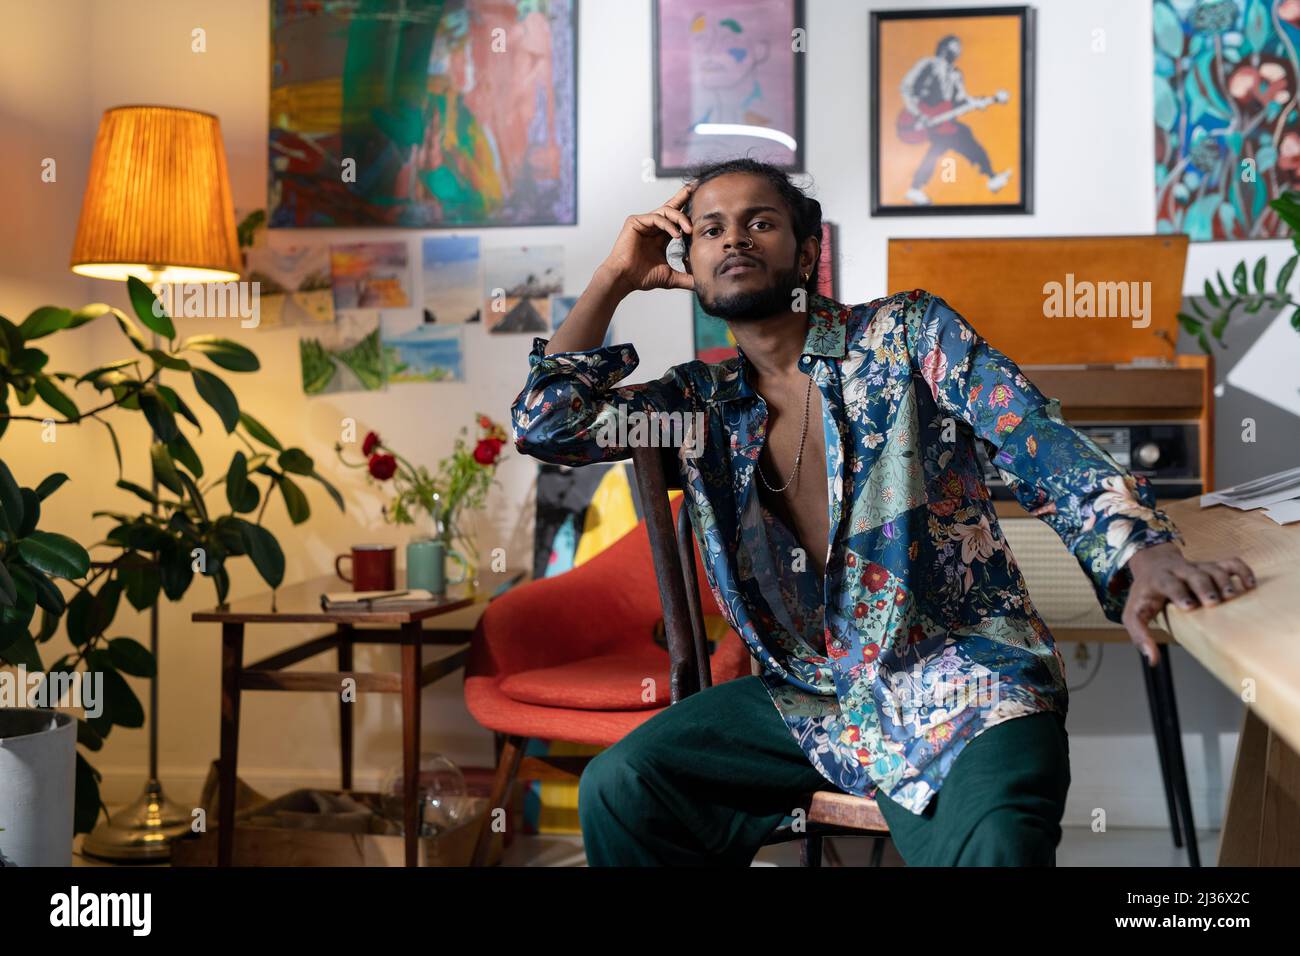 Portrait of handsome young Indian man wearing colorful shirt sitting in living room decorated with paintings Stock Photo